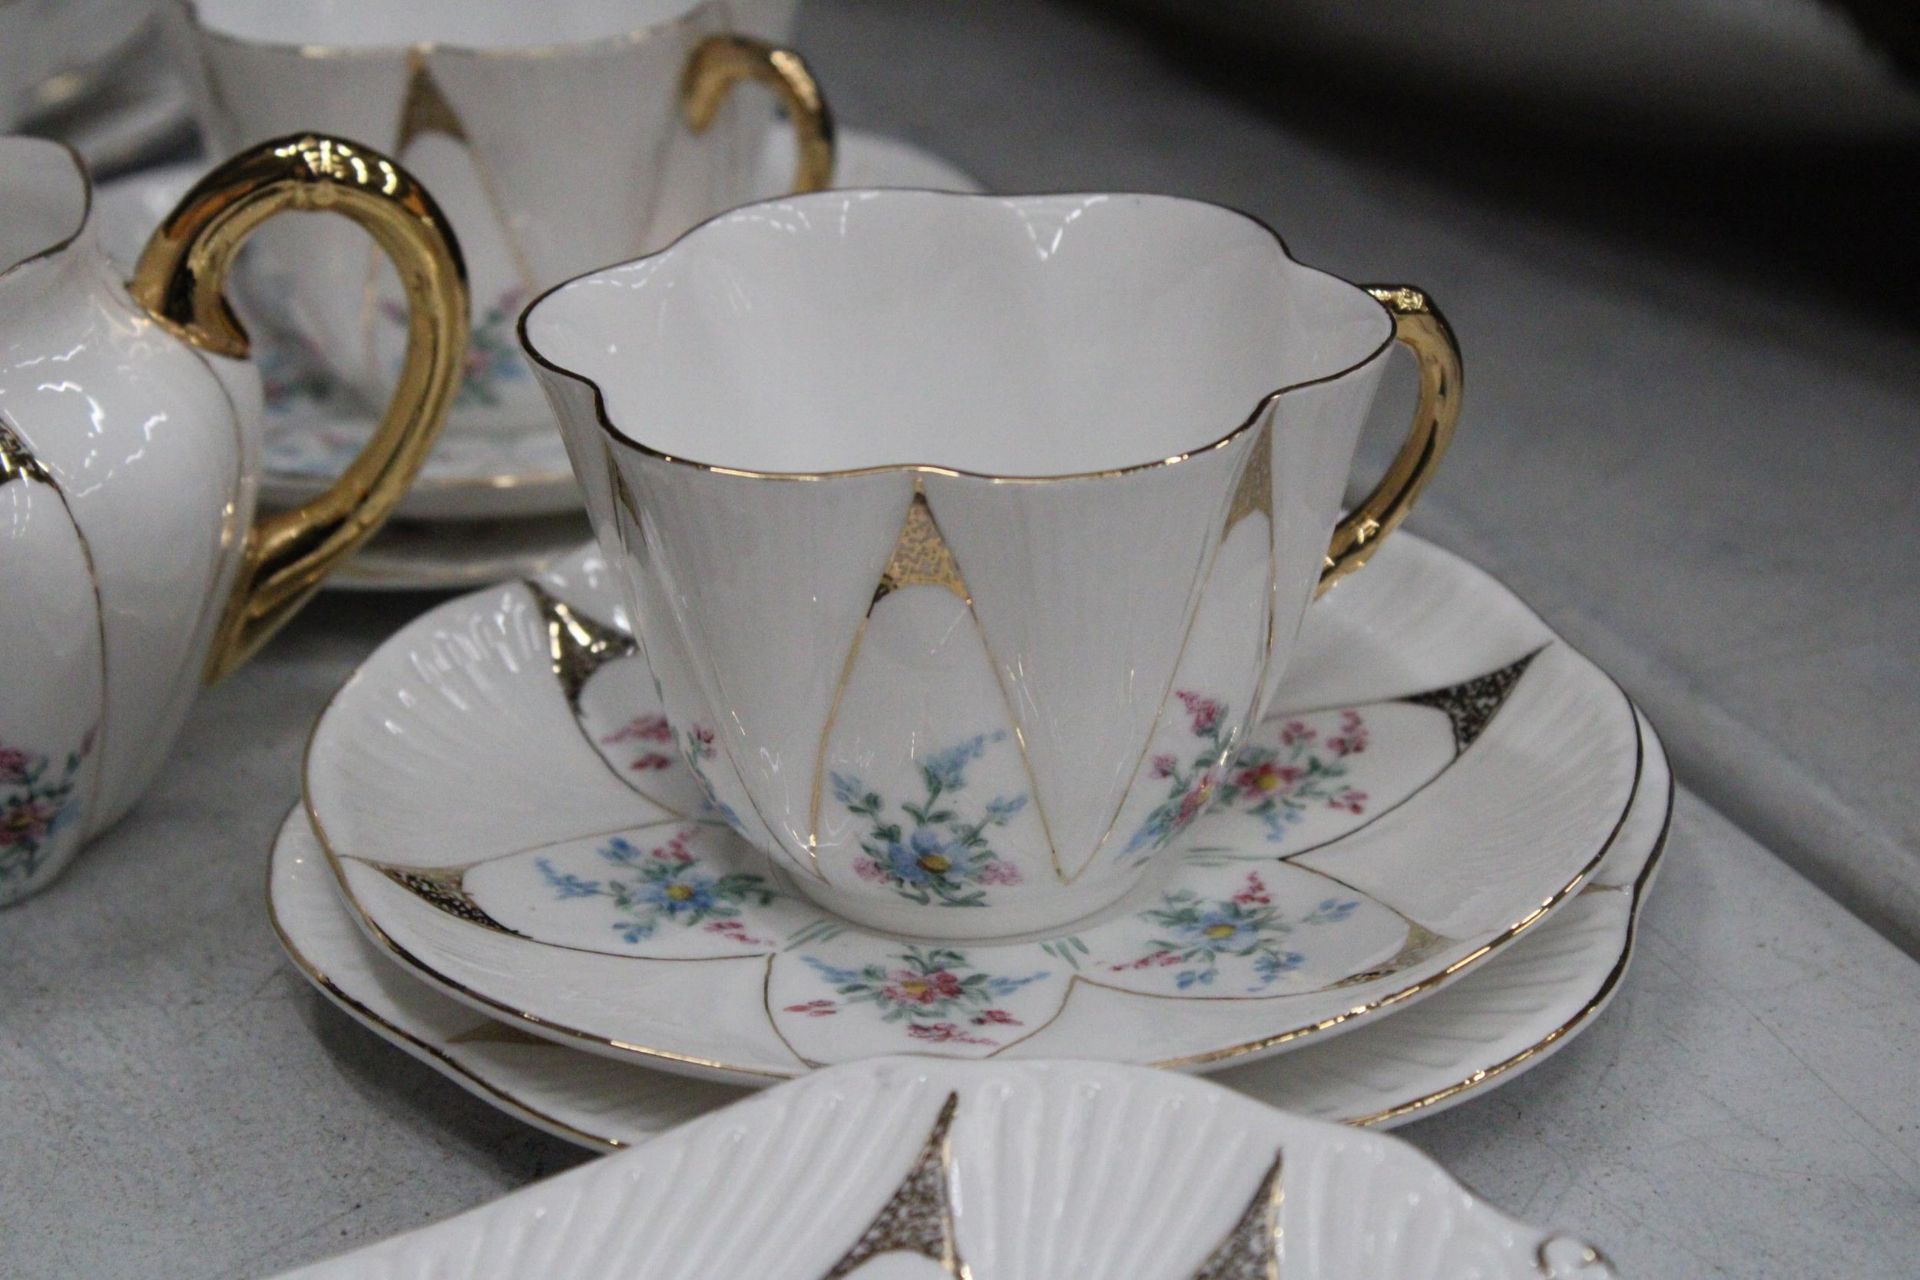 A VINTAGE SHELLEY HANDPAINTED DAINTY SHAPE TEACUPS AND SAUCERS TO INCLUDE SUGAR, CREAMER, CAKE/BREAD - Image 2 of 6